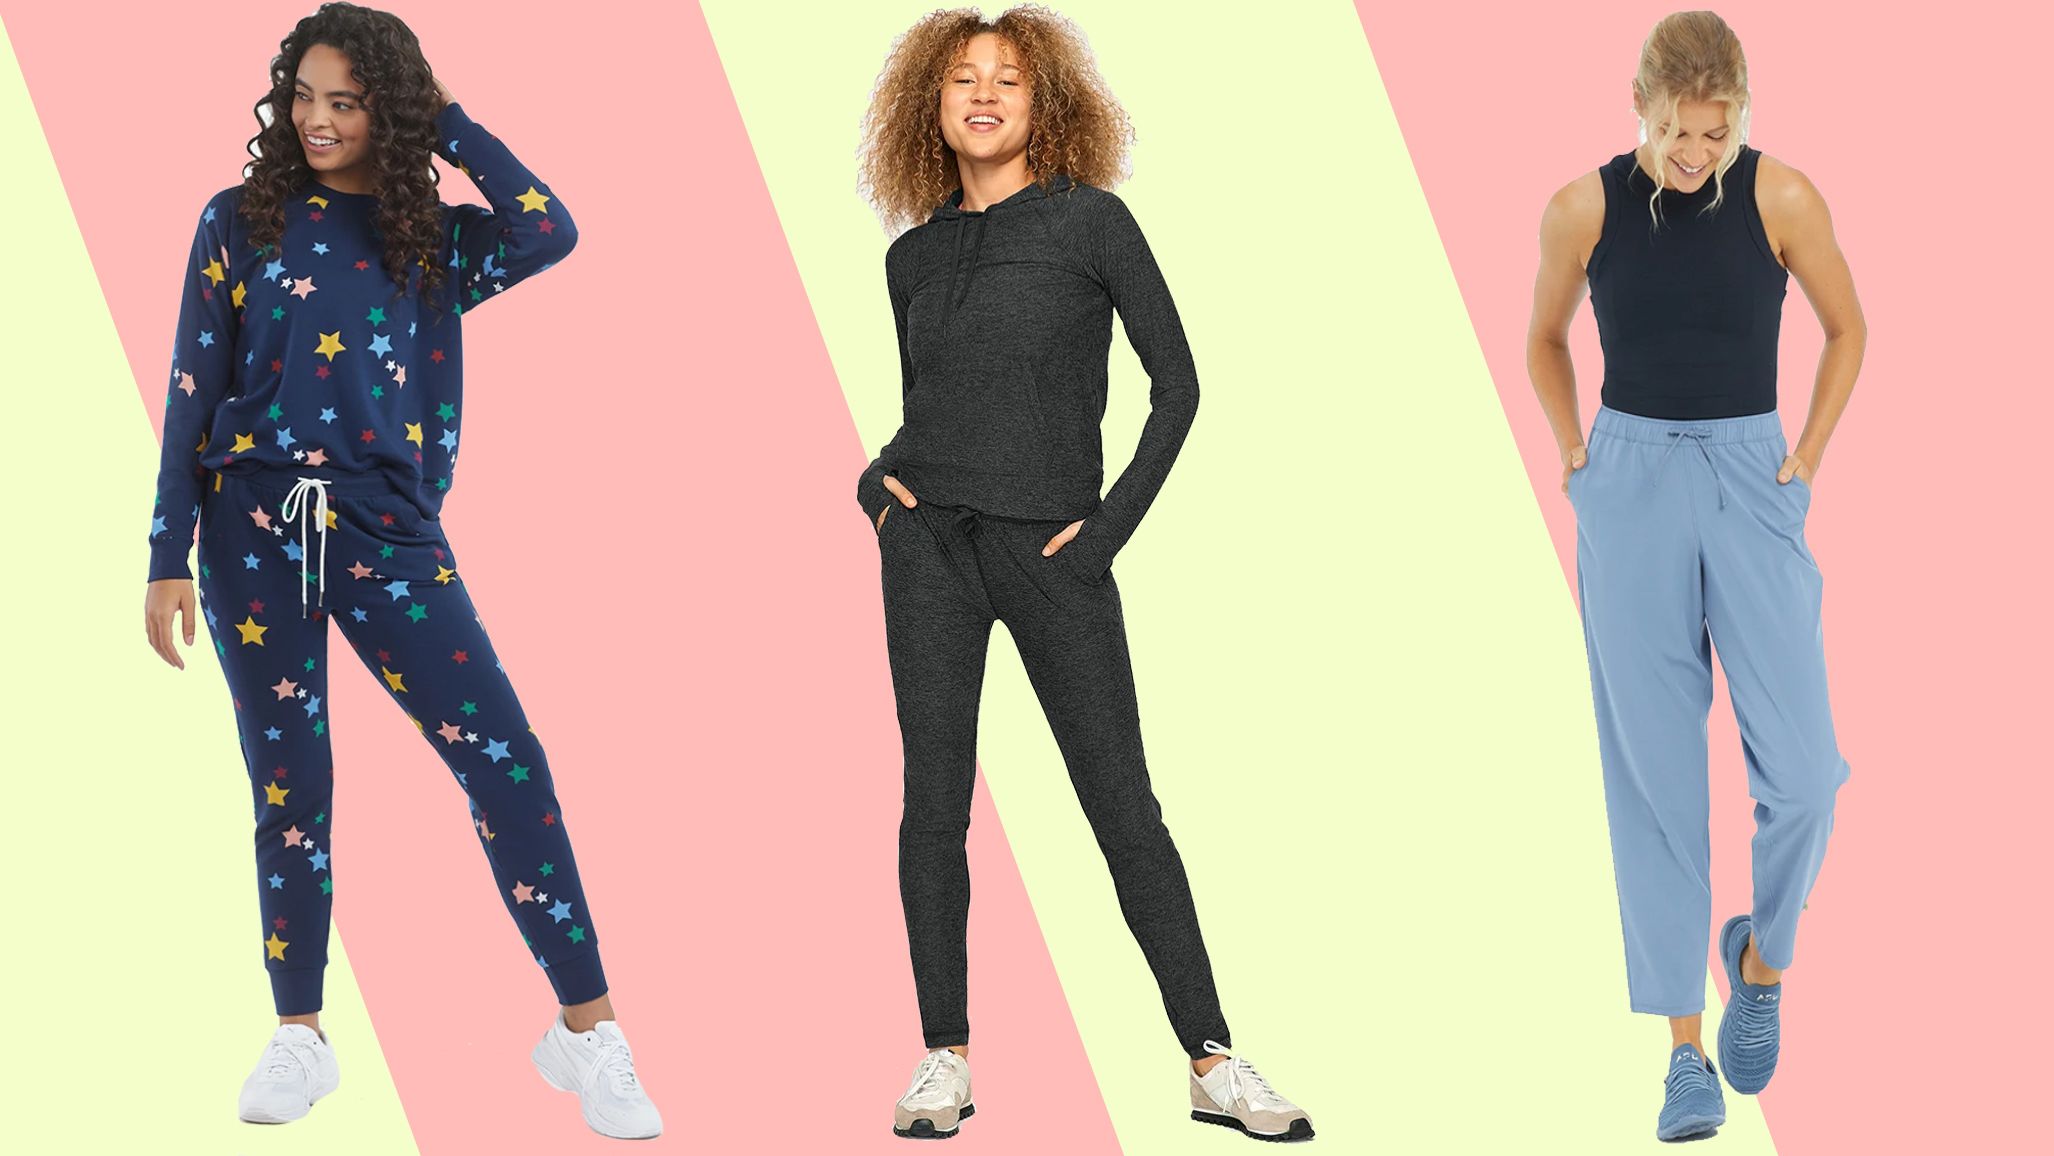 Find cute at-home workout outfits at Kohls.com.